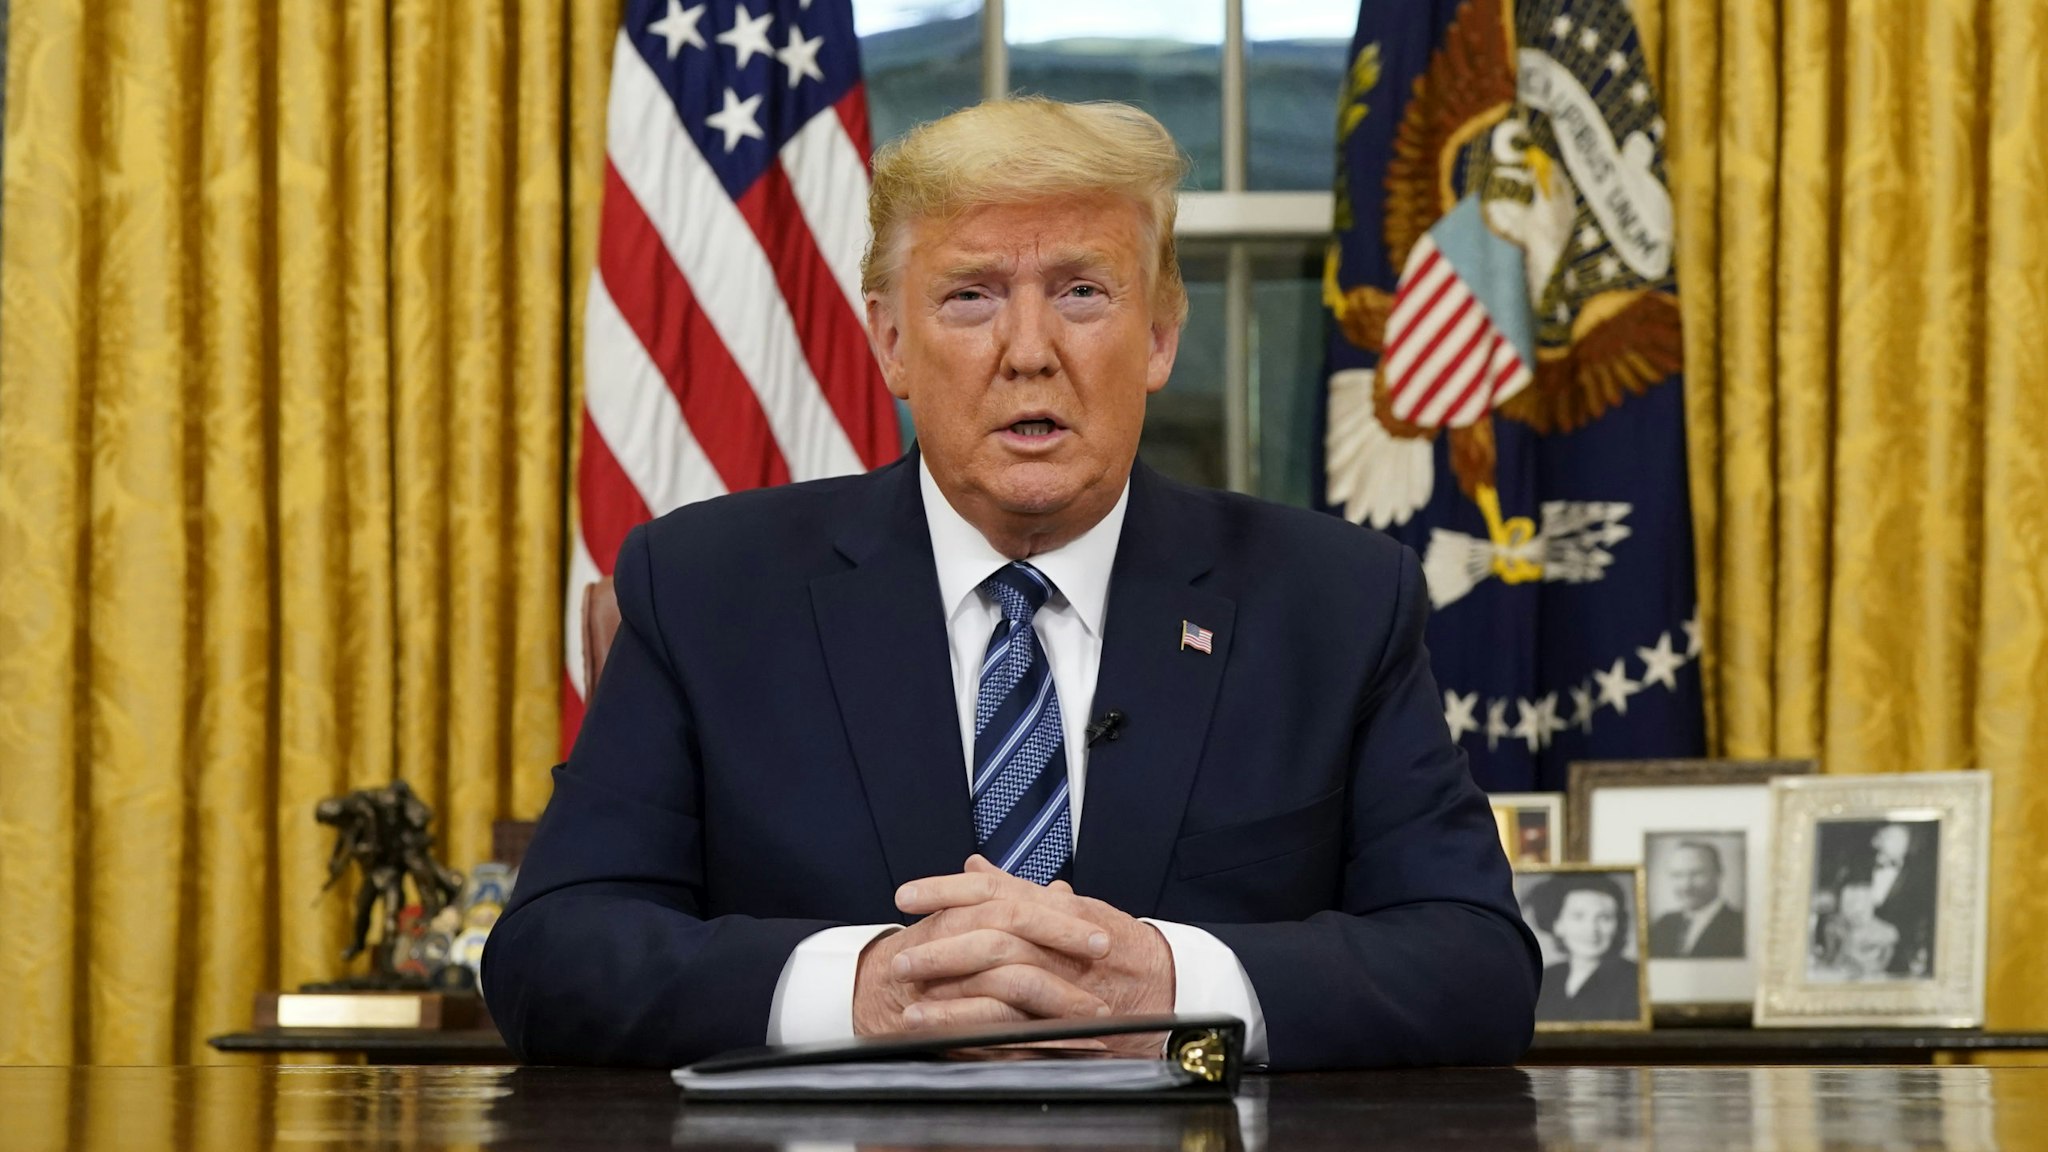 WASHINGTON, DC - MARCH 11: US President Donald Trump addresses the nation from the Oval Office about the widening coronavirus crisis on March 11, 2020. President Trump said the US will suspend all travel from Europe for the next 30 days. Since December 2019, coronavirus (COVID-19) has infected more than 109,000 people and killed more than 3,800 people in 105 countries.